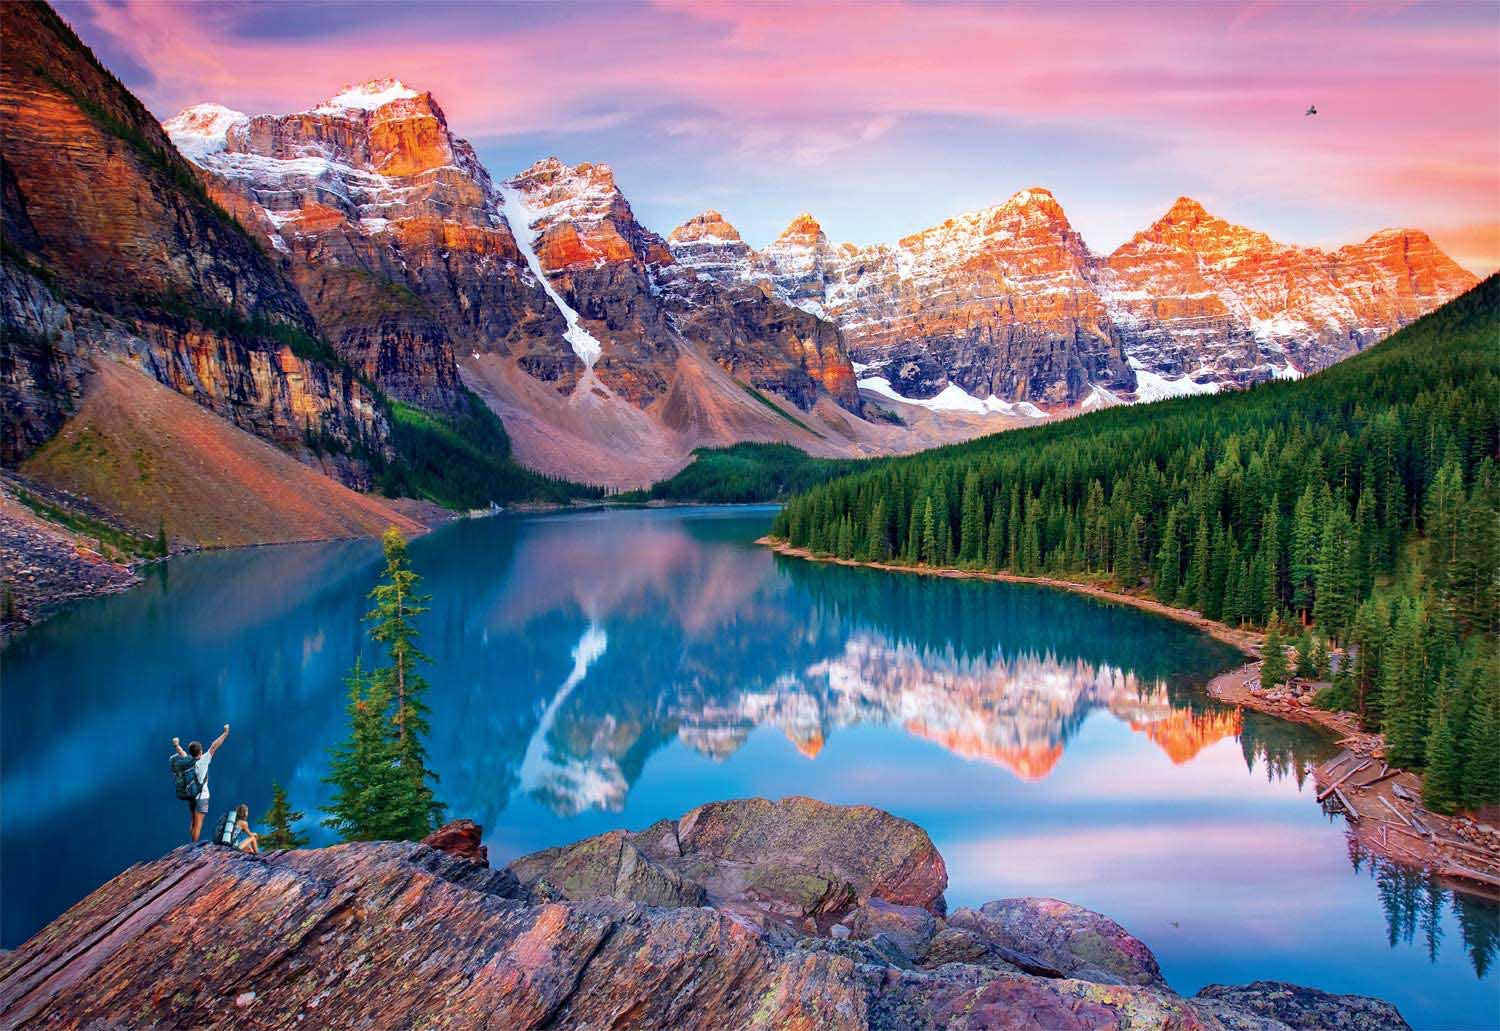 Mountains On Fire Mountain Jigsaw Puzzle